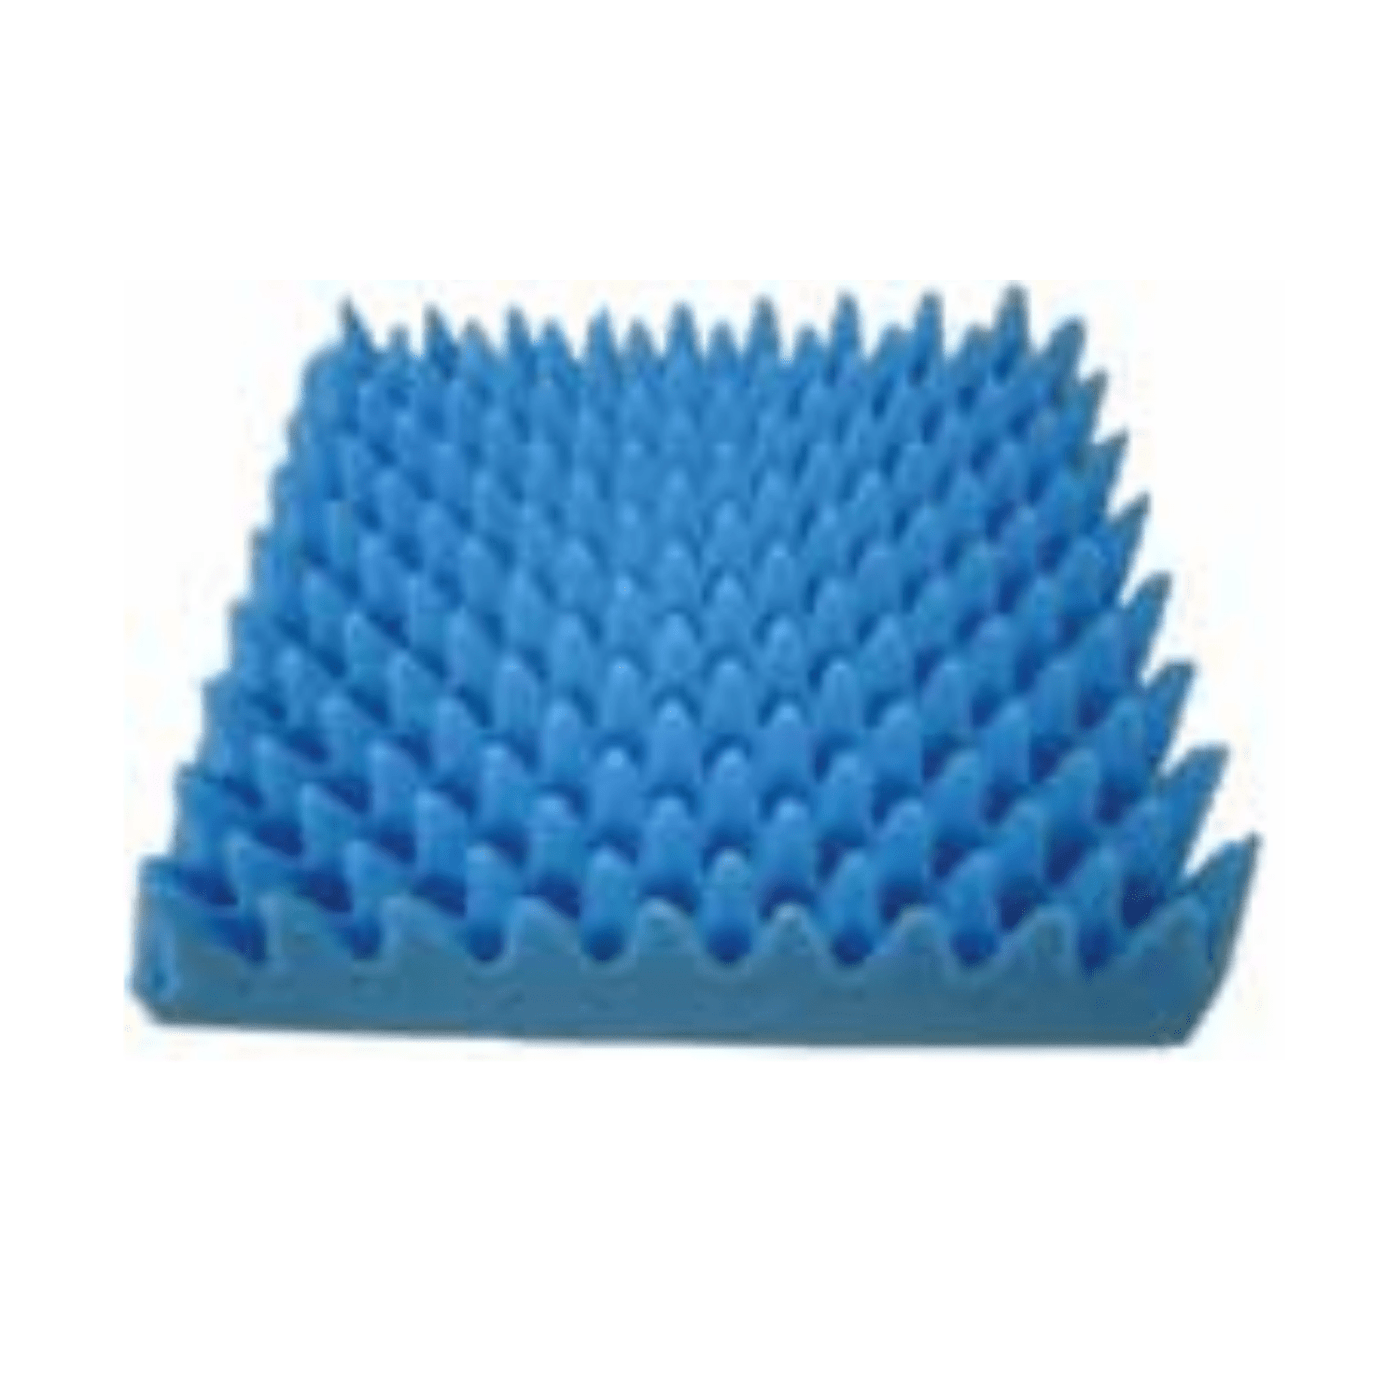 Custom Eggcrate Padding: Pressure Relief and Supportive Comfort